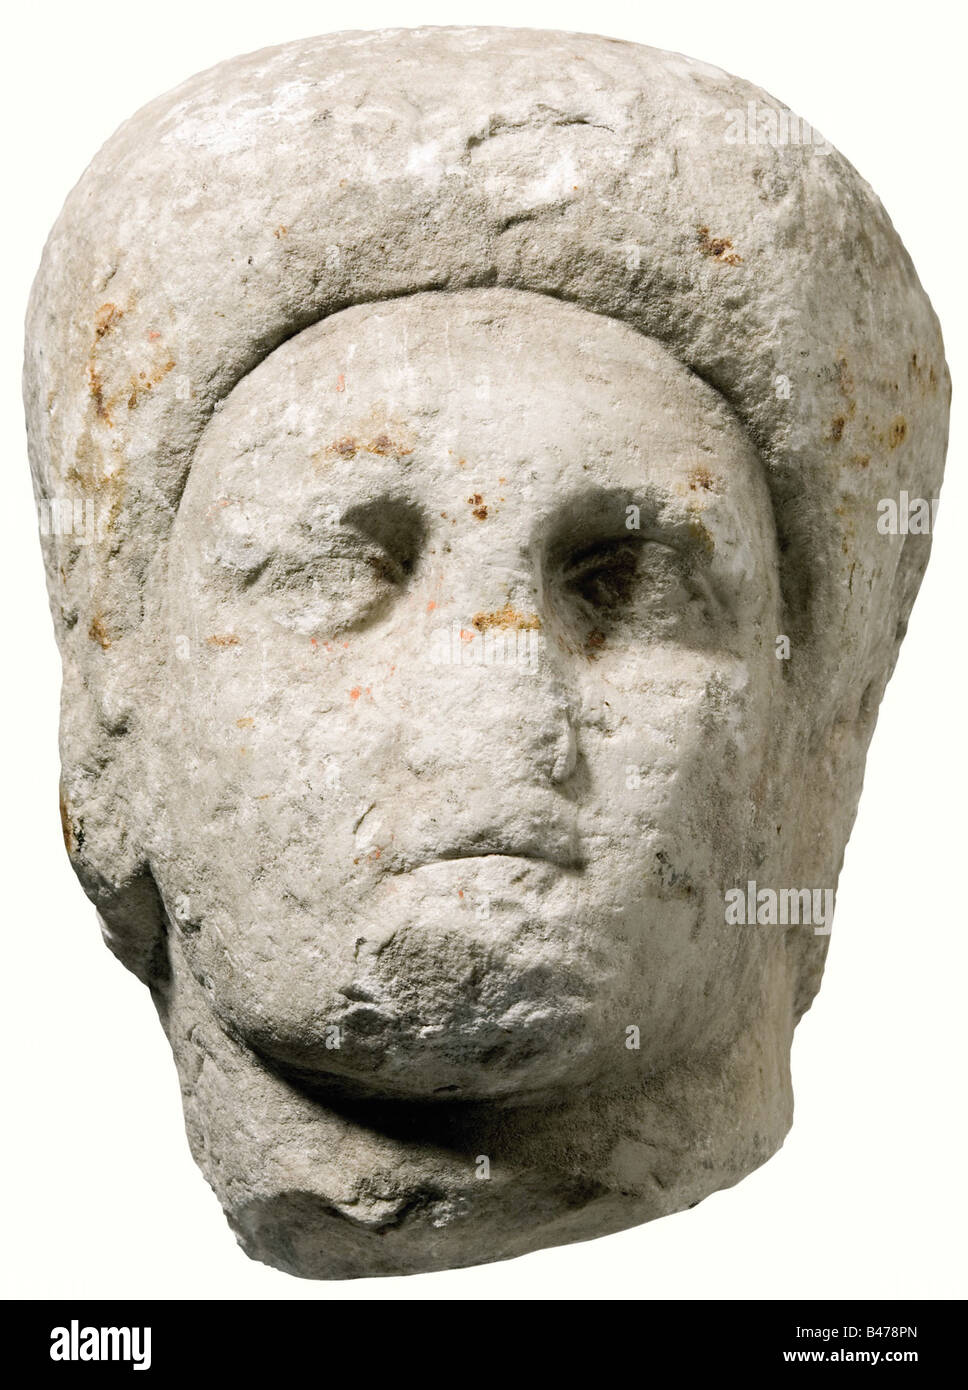 A Roman marble head, 3rd century A.D. Head of a man, made of white marble and slightly turned to the side. Hair in small curly locks, ears are indicated. Nose and chin with strong abrasions. Height 23.5 cm. historic, historical, ancient world, ancient world, ancient times, object, objects, stills, clipping, cut out, cut-out, cut-outs, sculpture, sculptures, statuette, figurine, figurines, statuettes, fine arts, art, Stock Photo